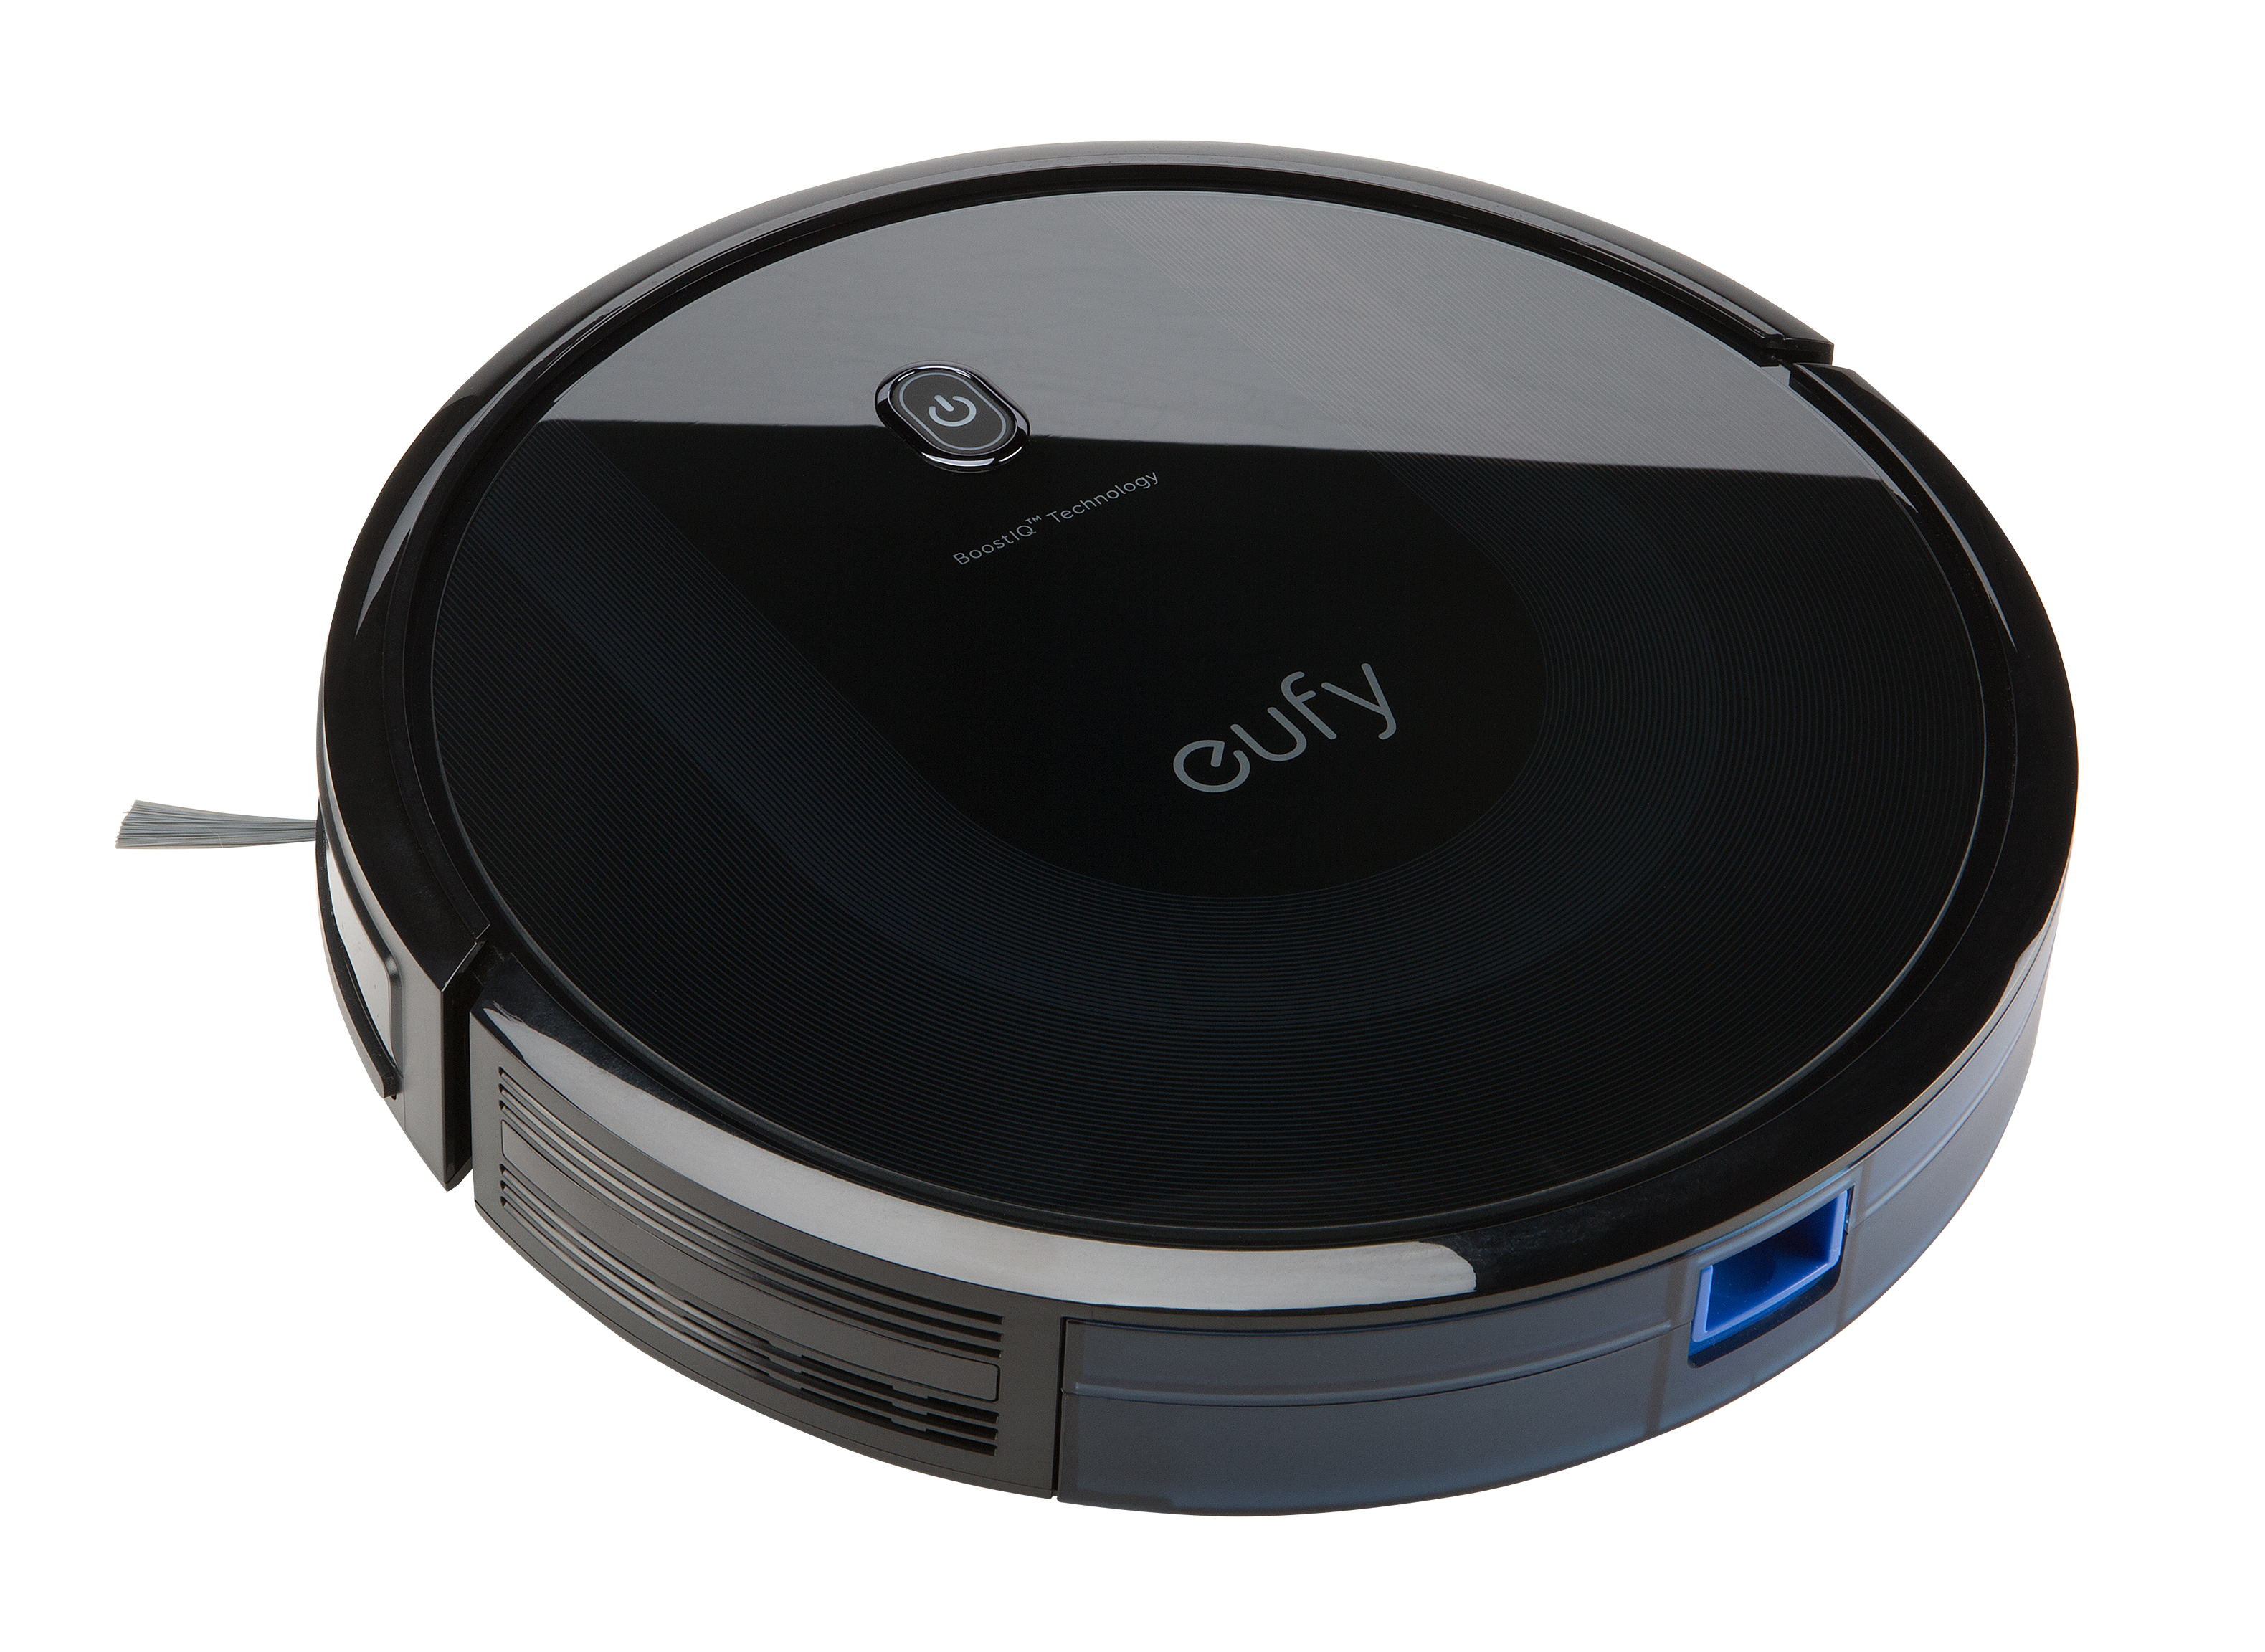 Eufy RoboVac 11S Max Vacuum Cleaner Review - Consumer Reports